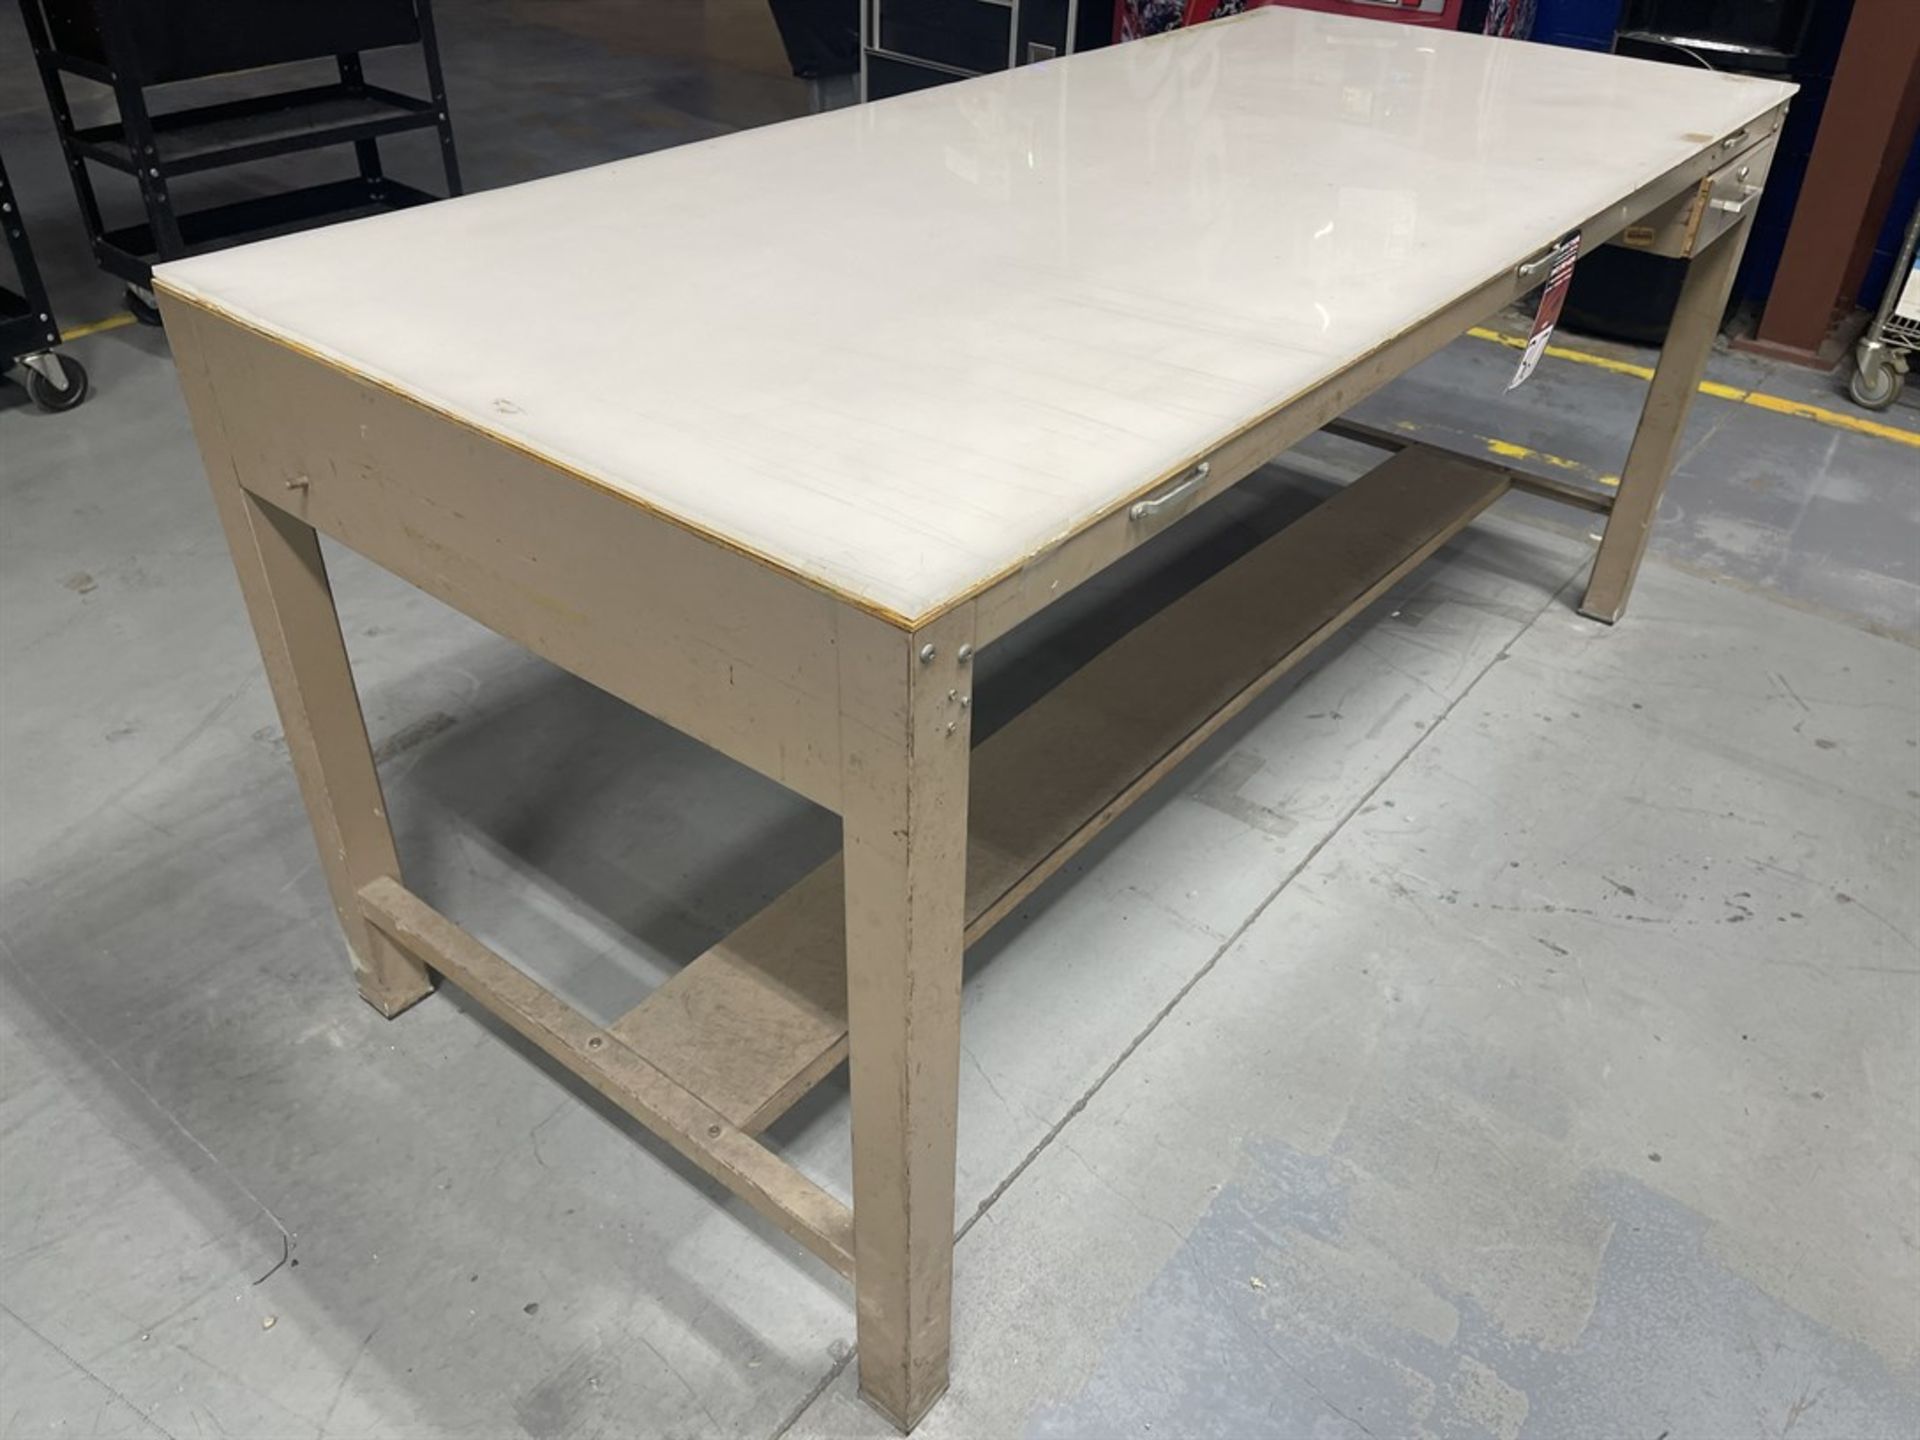 Inspection Table w/ Poly Top, 35.5" x 81" - Image 2 of 2